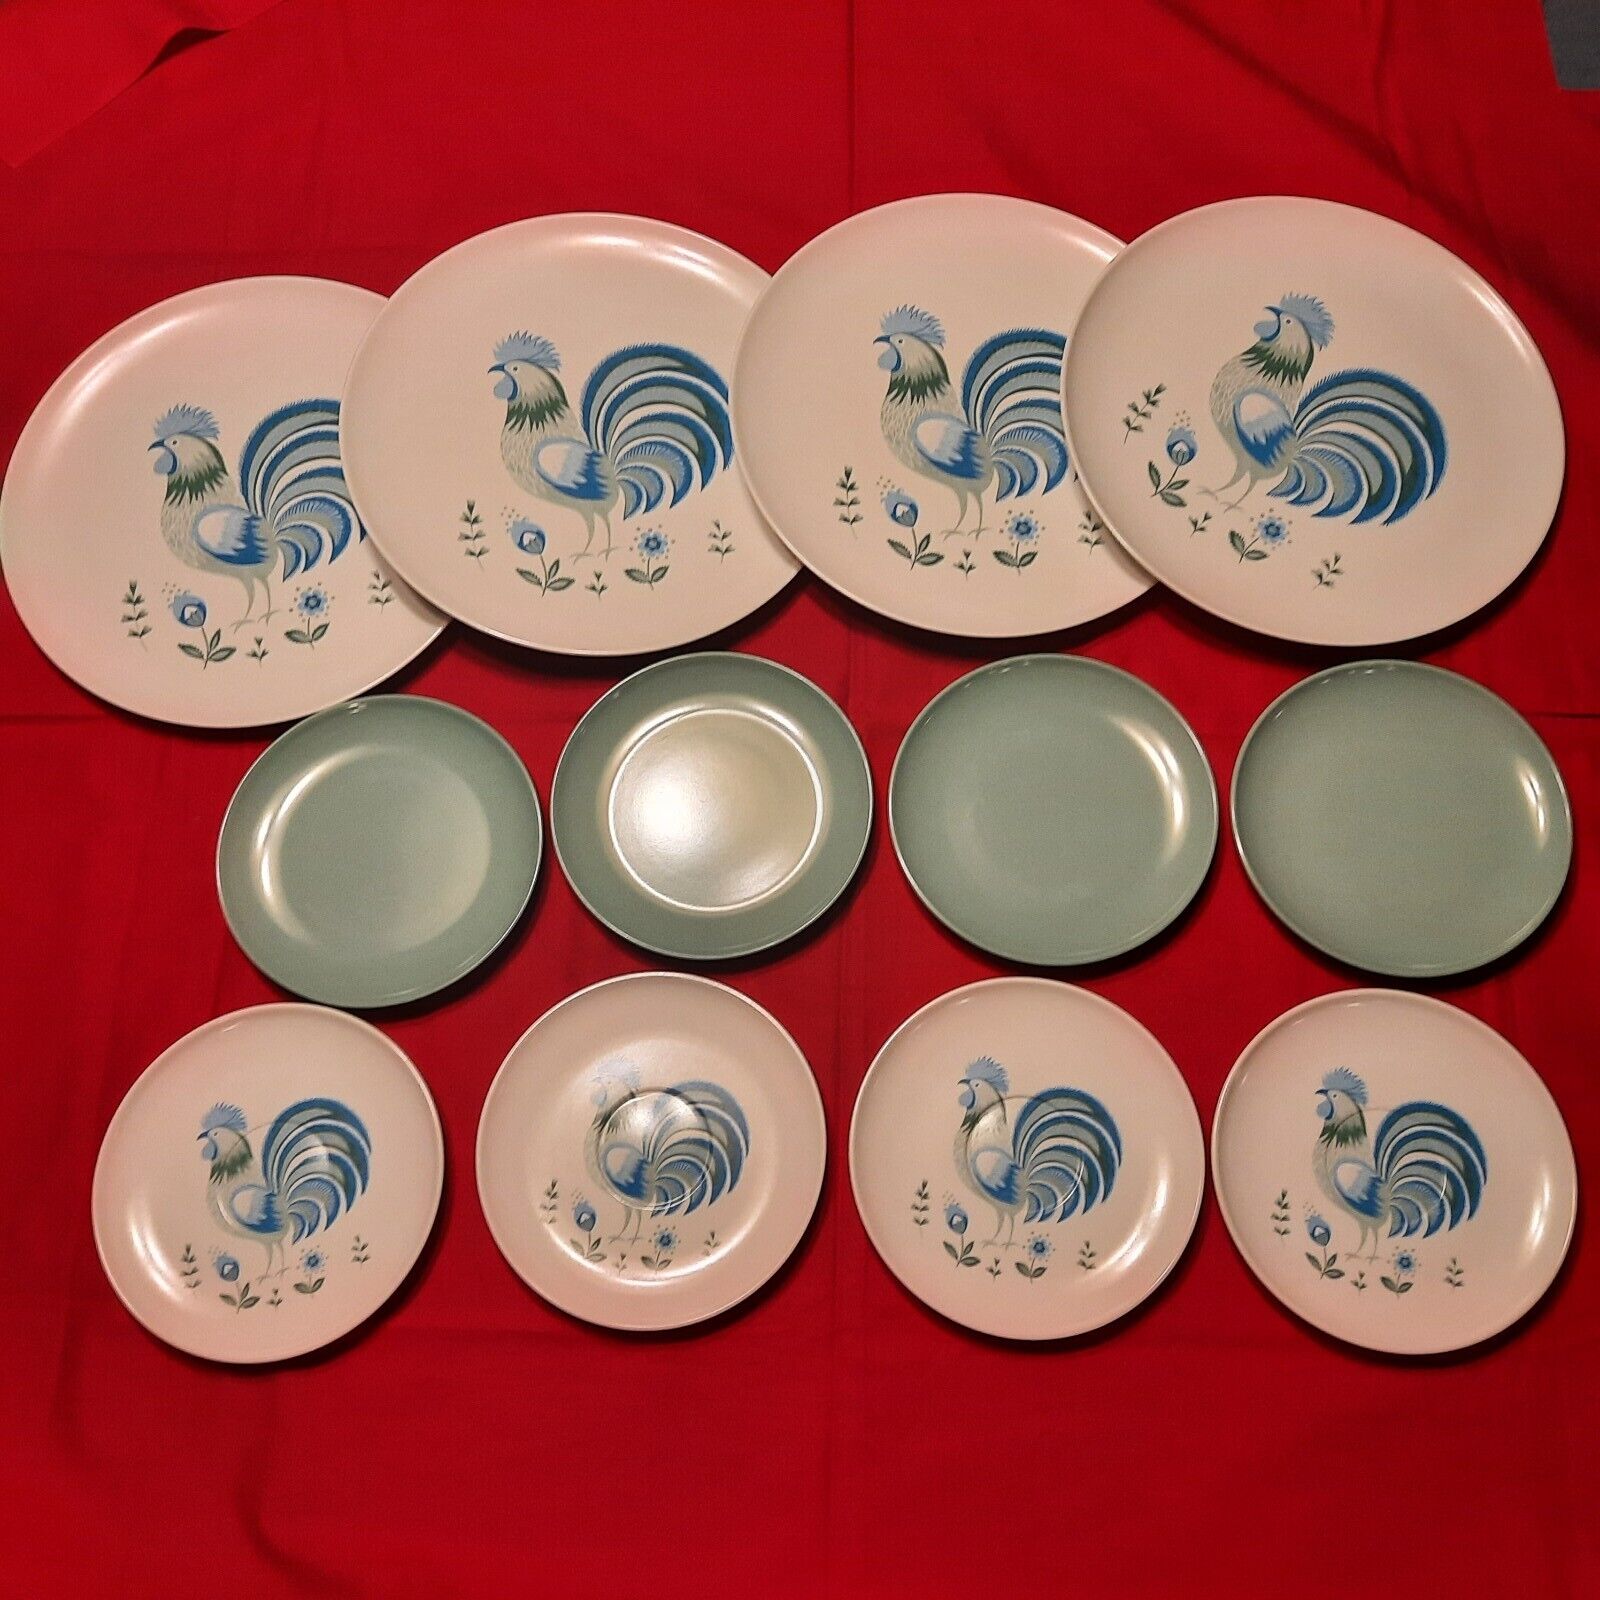 Vintage Aztec Melmac Dishes, Plates & Saucers, Rooster